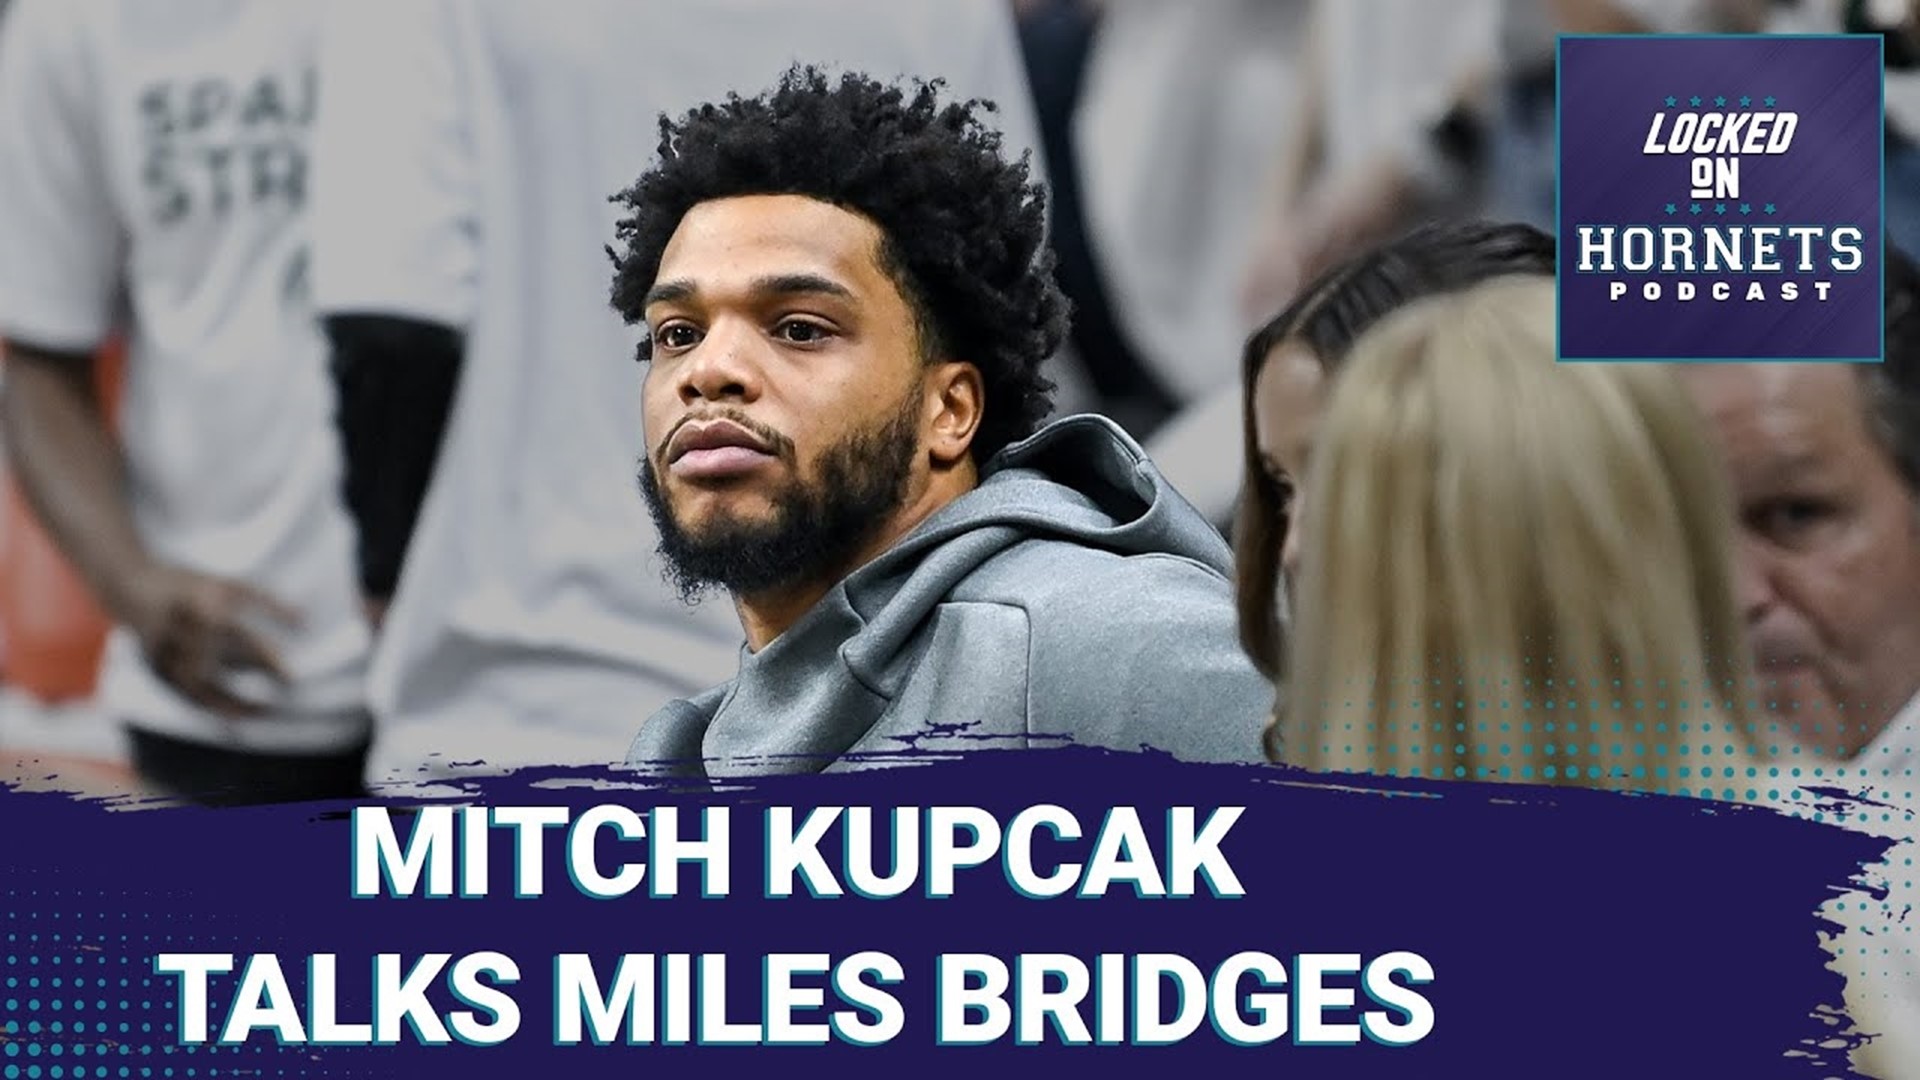 Hornets GM Mitch Kupchak speaks on the status of Miles Bridges and how long the situation continues to play out. How much could that affect the upcoming offseason?